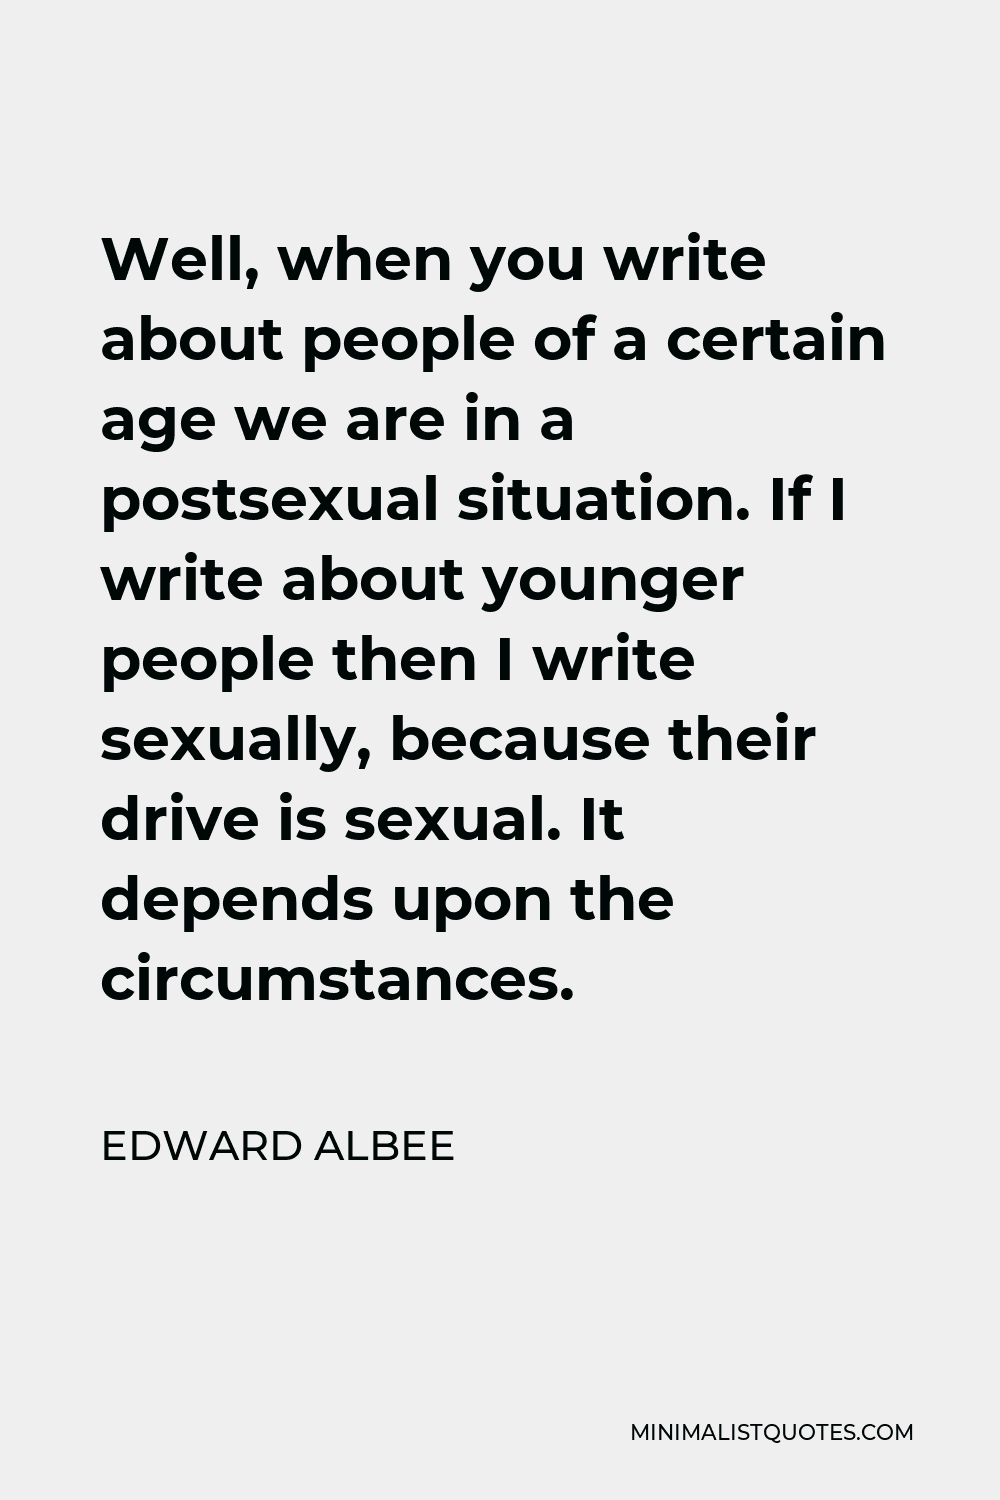 Edward Albee Quote - Well, when you write about people of a certain age we are in a postsexual situation. If I write about younger people then I write sexually, because their drive is sexual. It depends upon the circumstances.